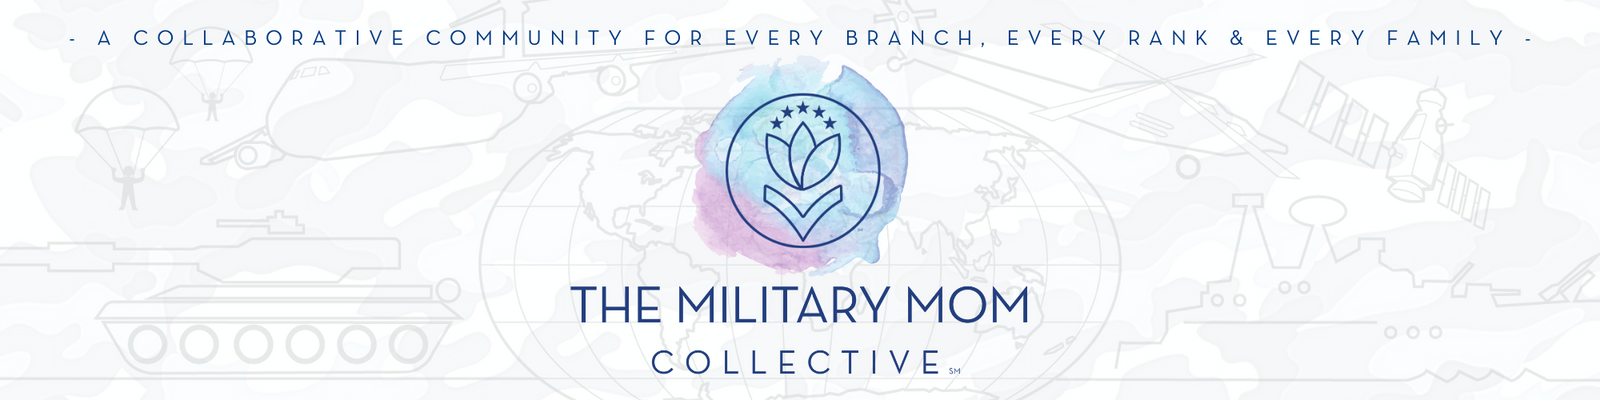 The Military Mom Collective